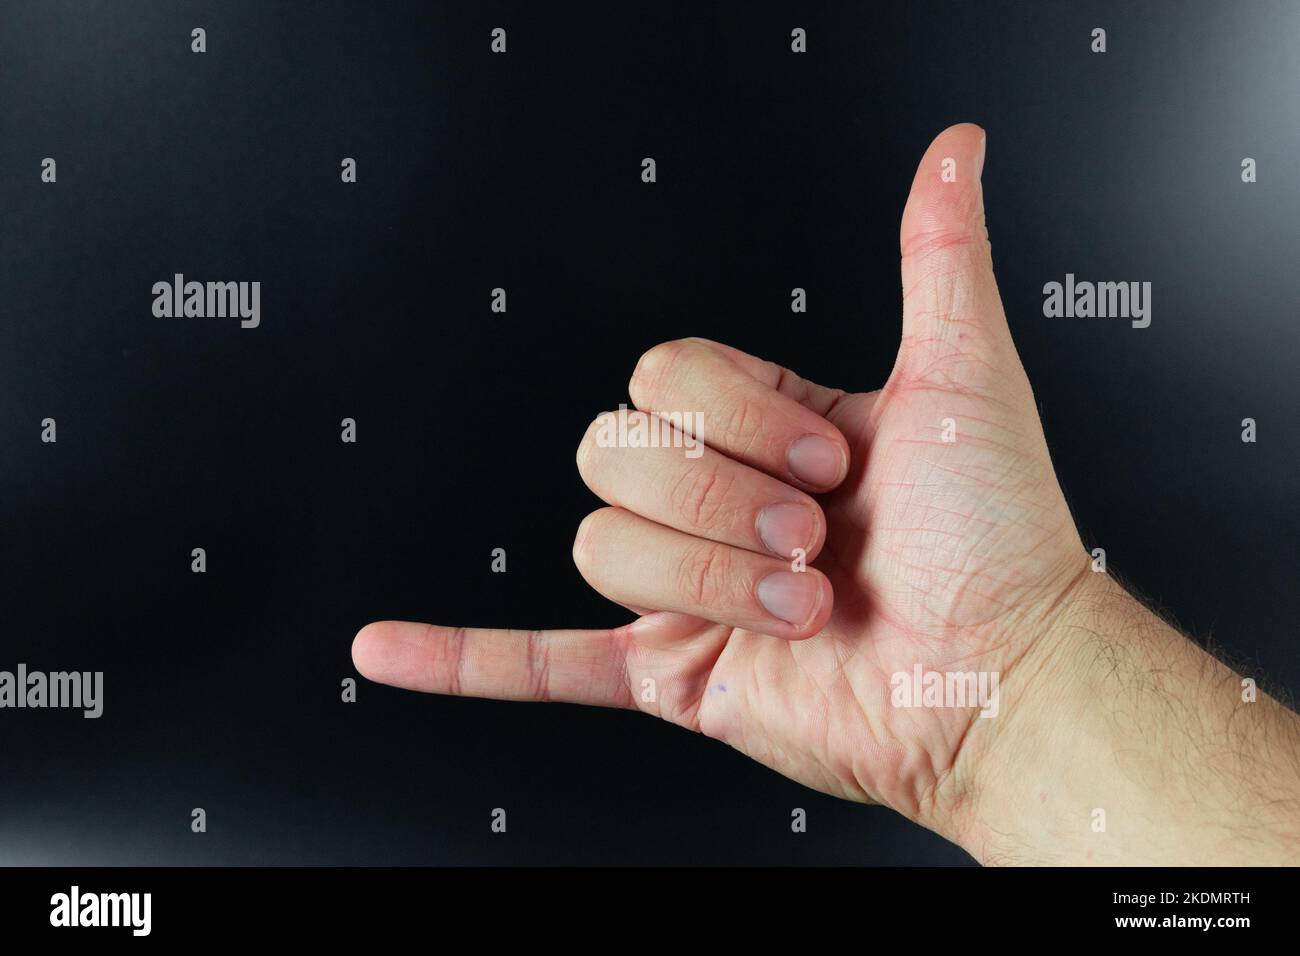 Call me sign isolated on background. Shaka sign, hang loose, right on or hang ten gesture. Stock Photo